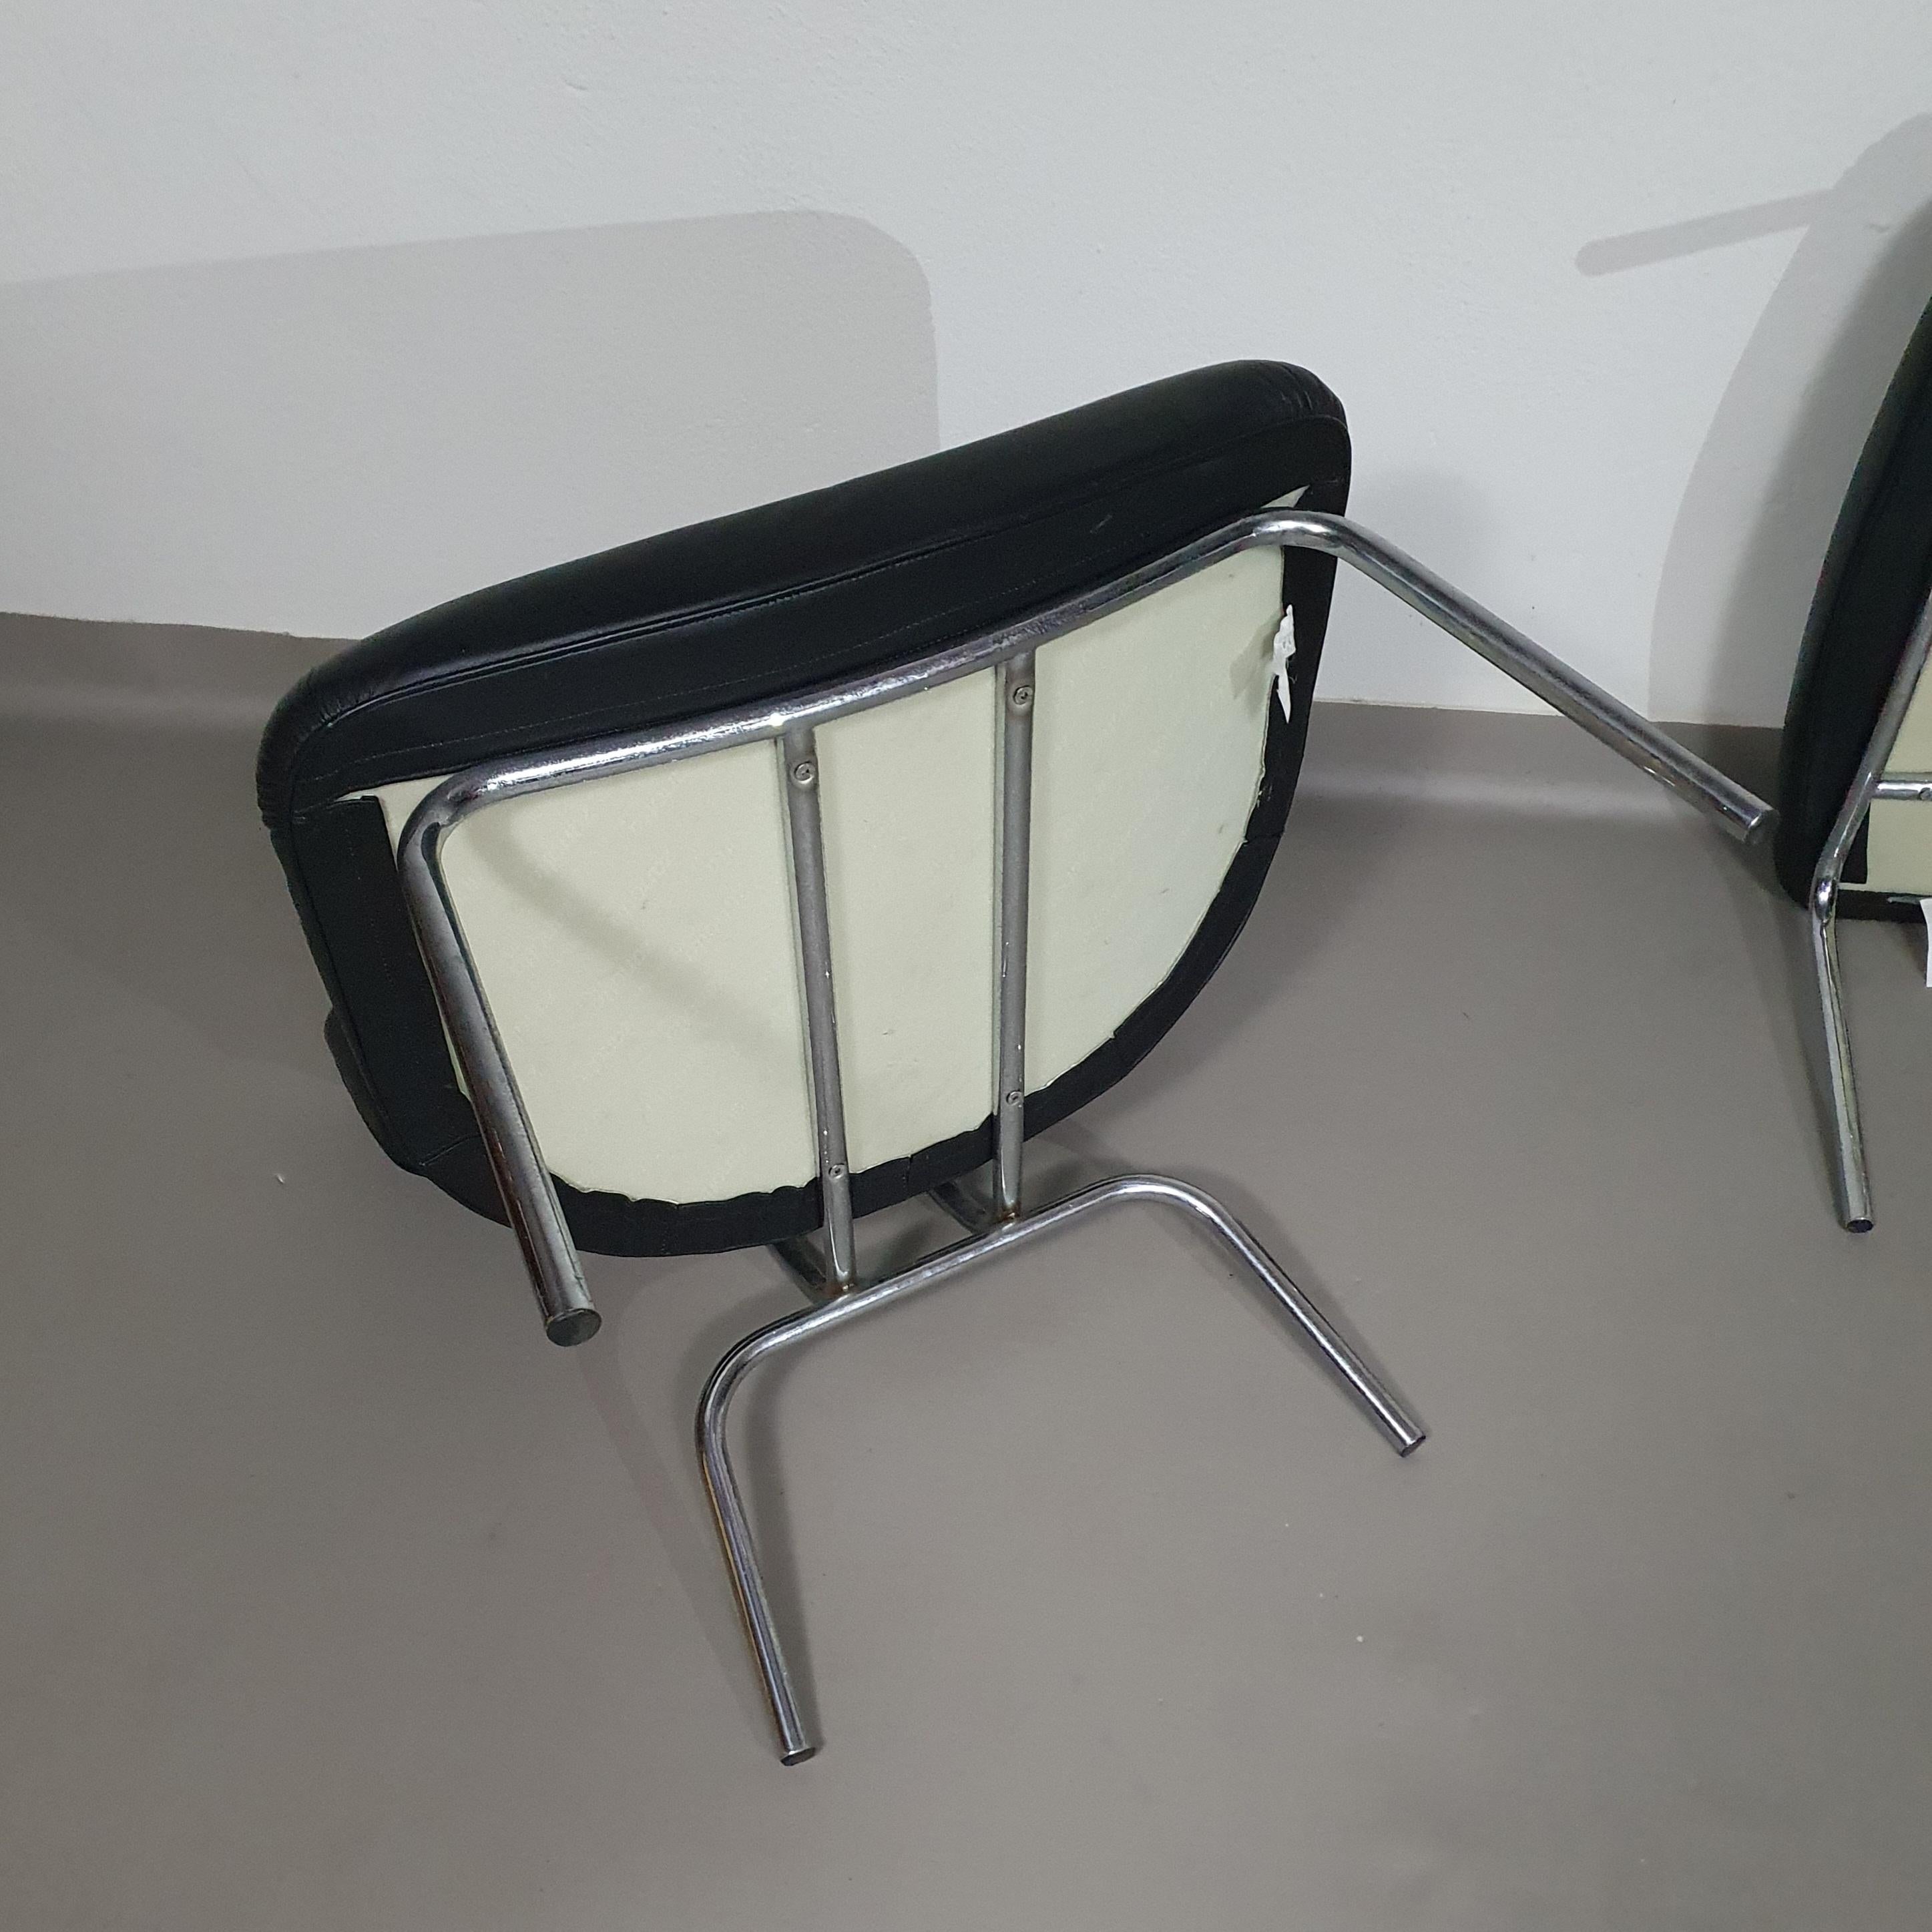 Zanotta Clea lounge chair / pouf in black leather / 1997 by Kristiina Lassus For Sale 7